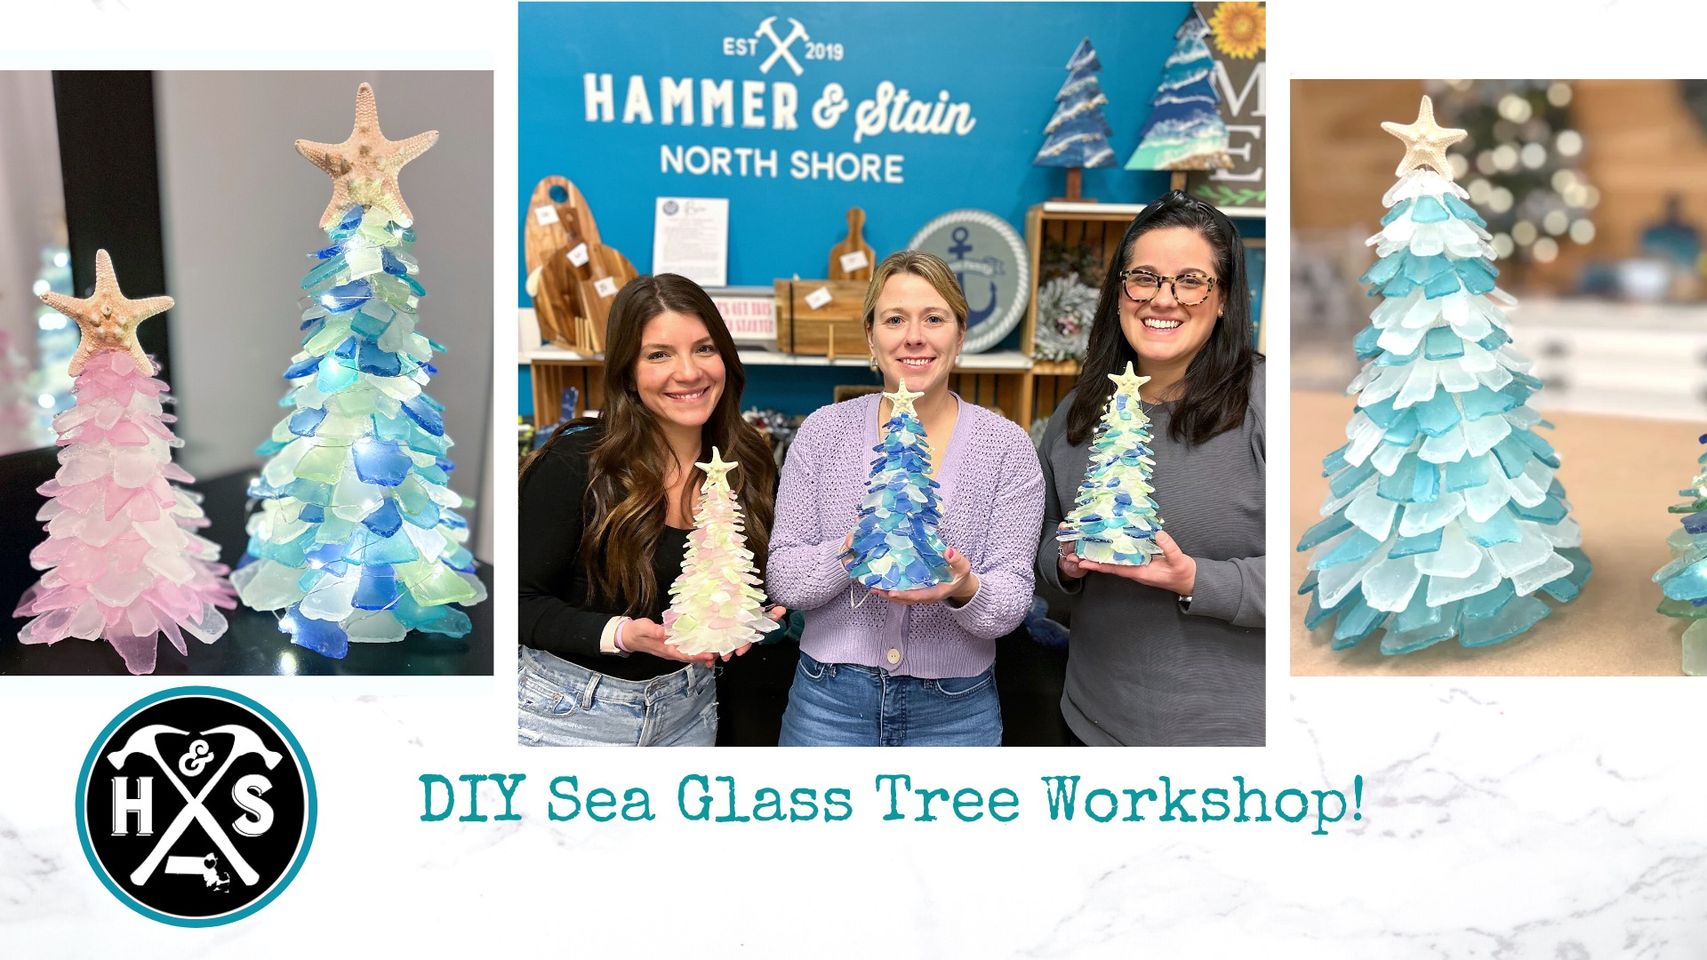 Join our DIY Sea Glass Christmas Tree Workshop! Enjoy creating beautiful holiday decorations with sea glass, in a fun and engaging environment. See the joyful smiles on women's faces as they proudly show off their unique sea glass Christmas trees. Don't miss out on this hands-on workshop that promotes creativity, fun, and camaraderie. Your special handmade tree will be the talk of the season!